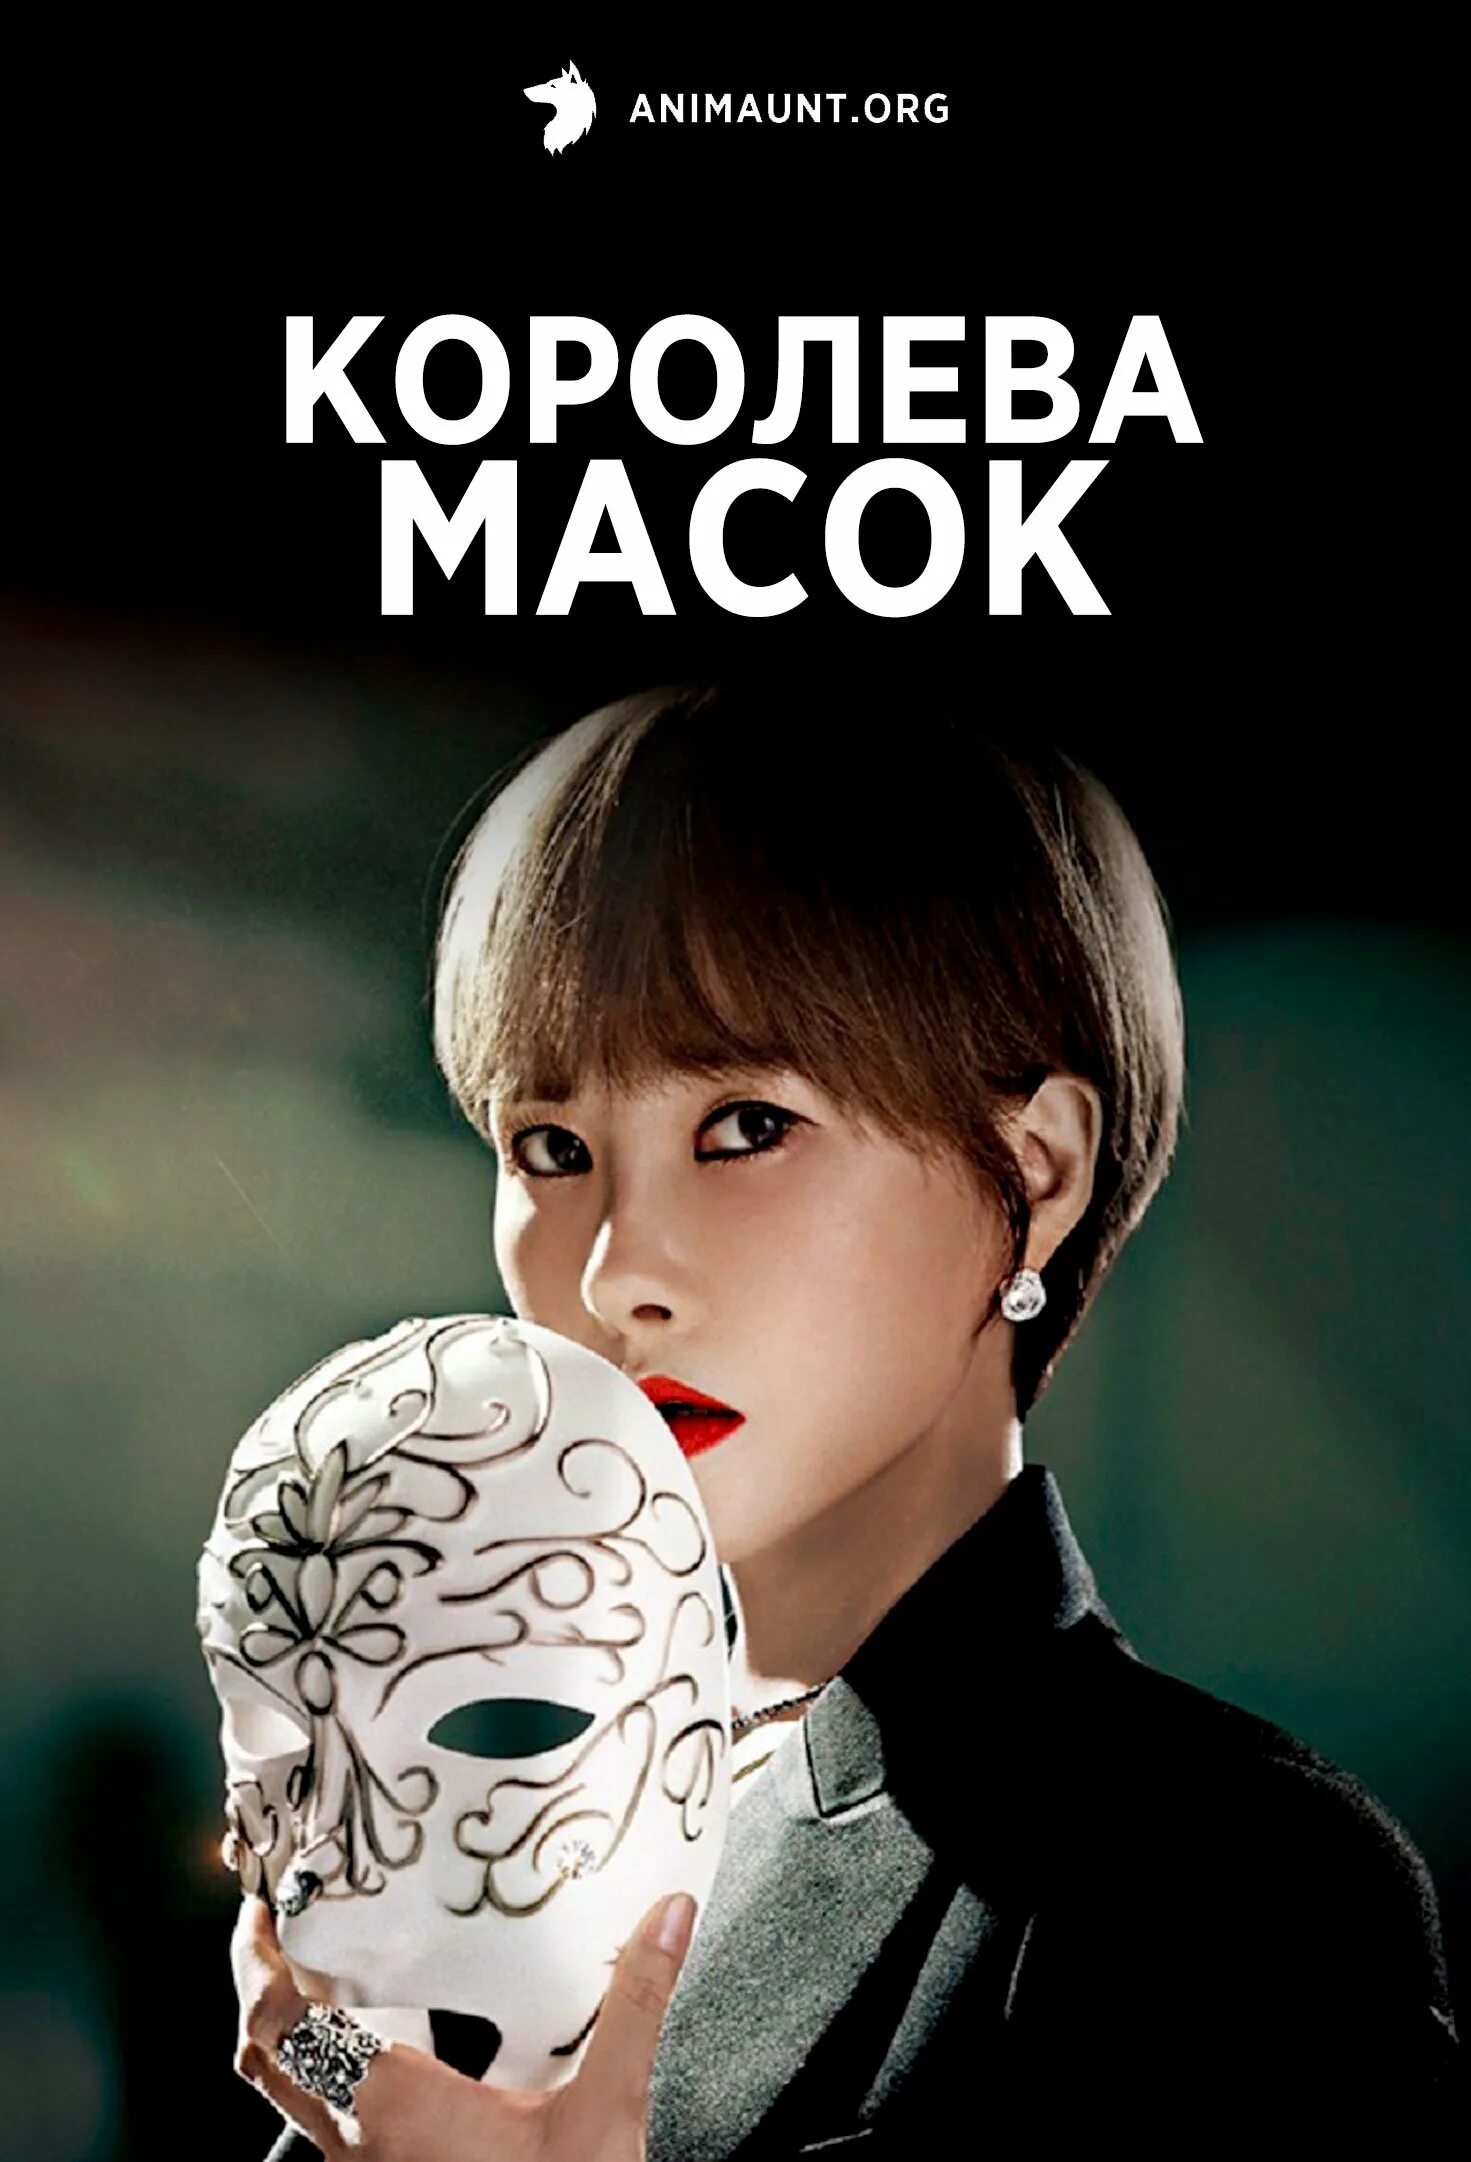 Queen of the Mask 2023. Queen of the Mask 2023 дорама. Queen of Masks / Queen of the Mask 2023. Женщина в маске дорама. Дорама маска 1